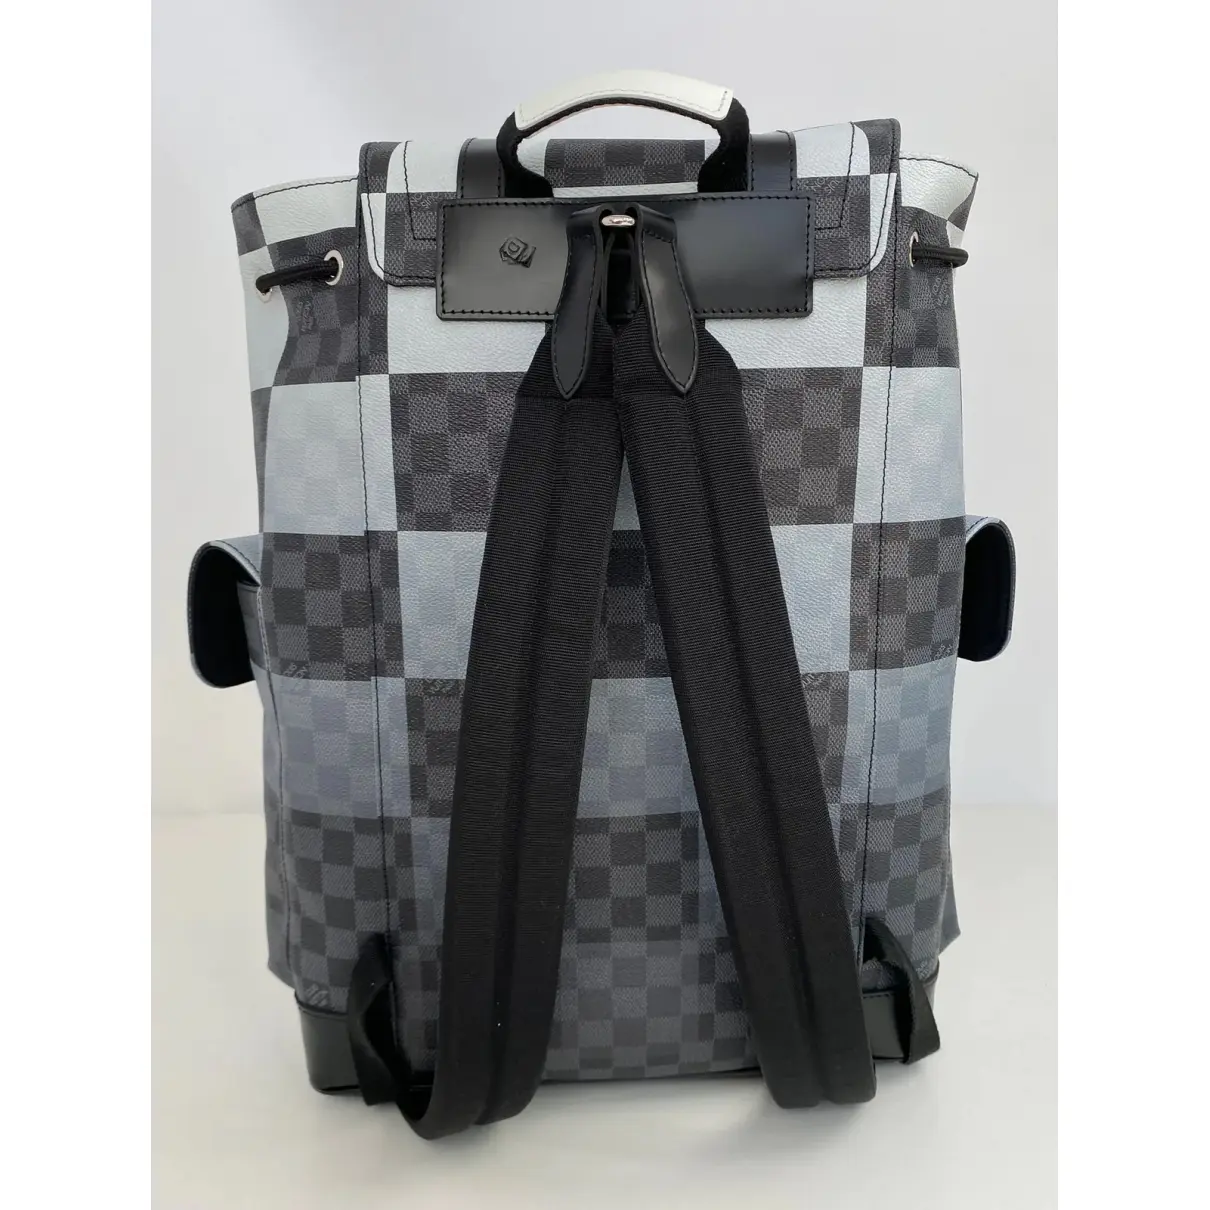 Christopher Backpack leather bag Louis Vuitton